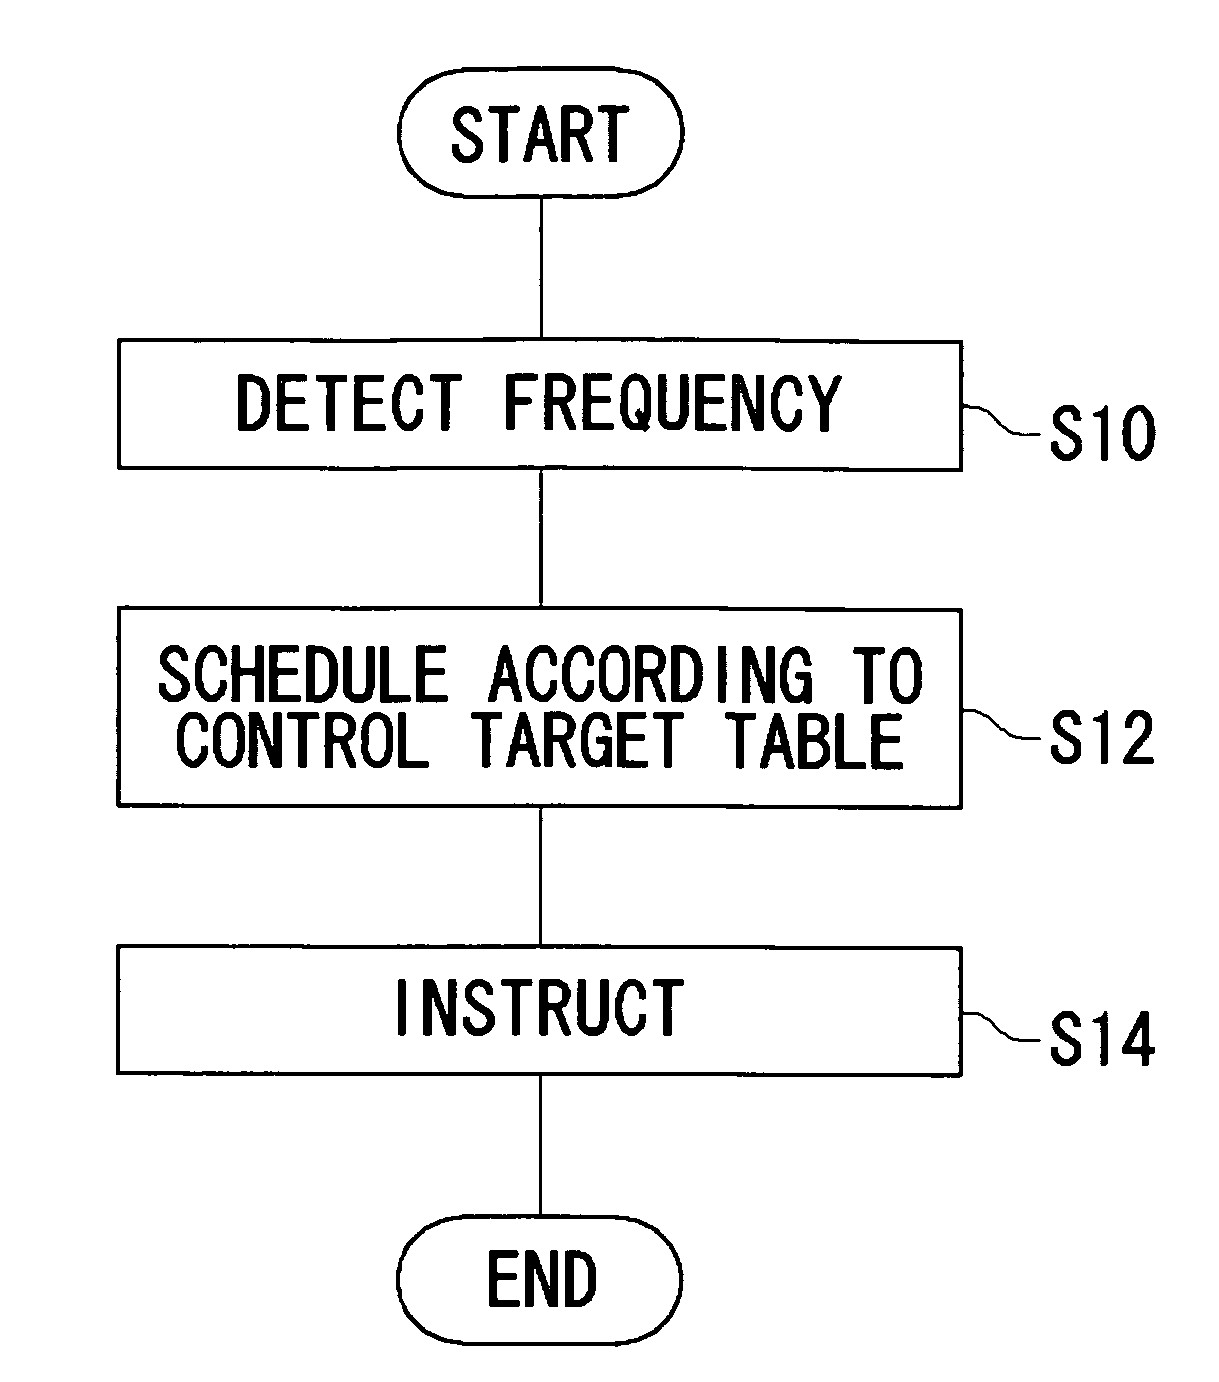 Skipping non-time-critical task according to control table when operating frequency falls